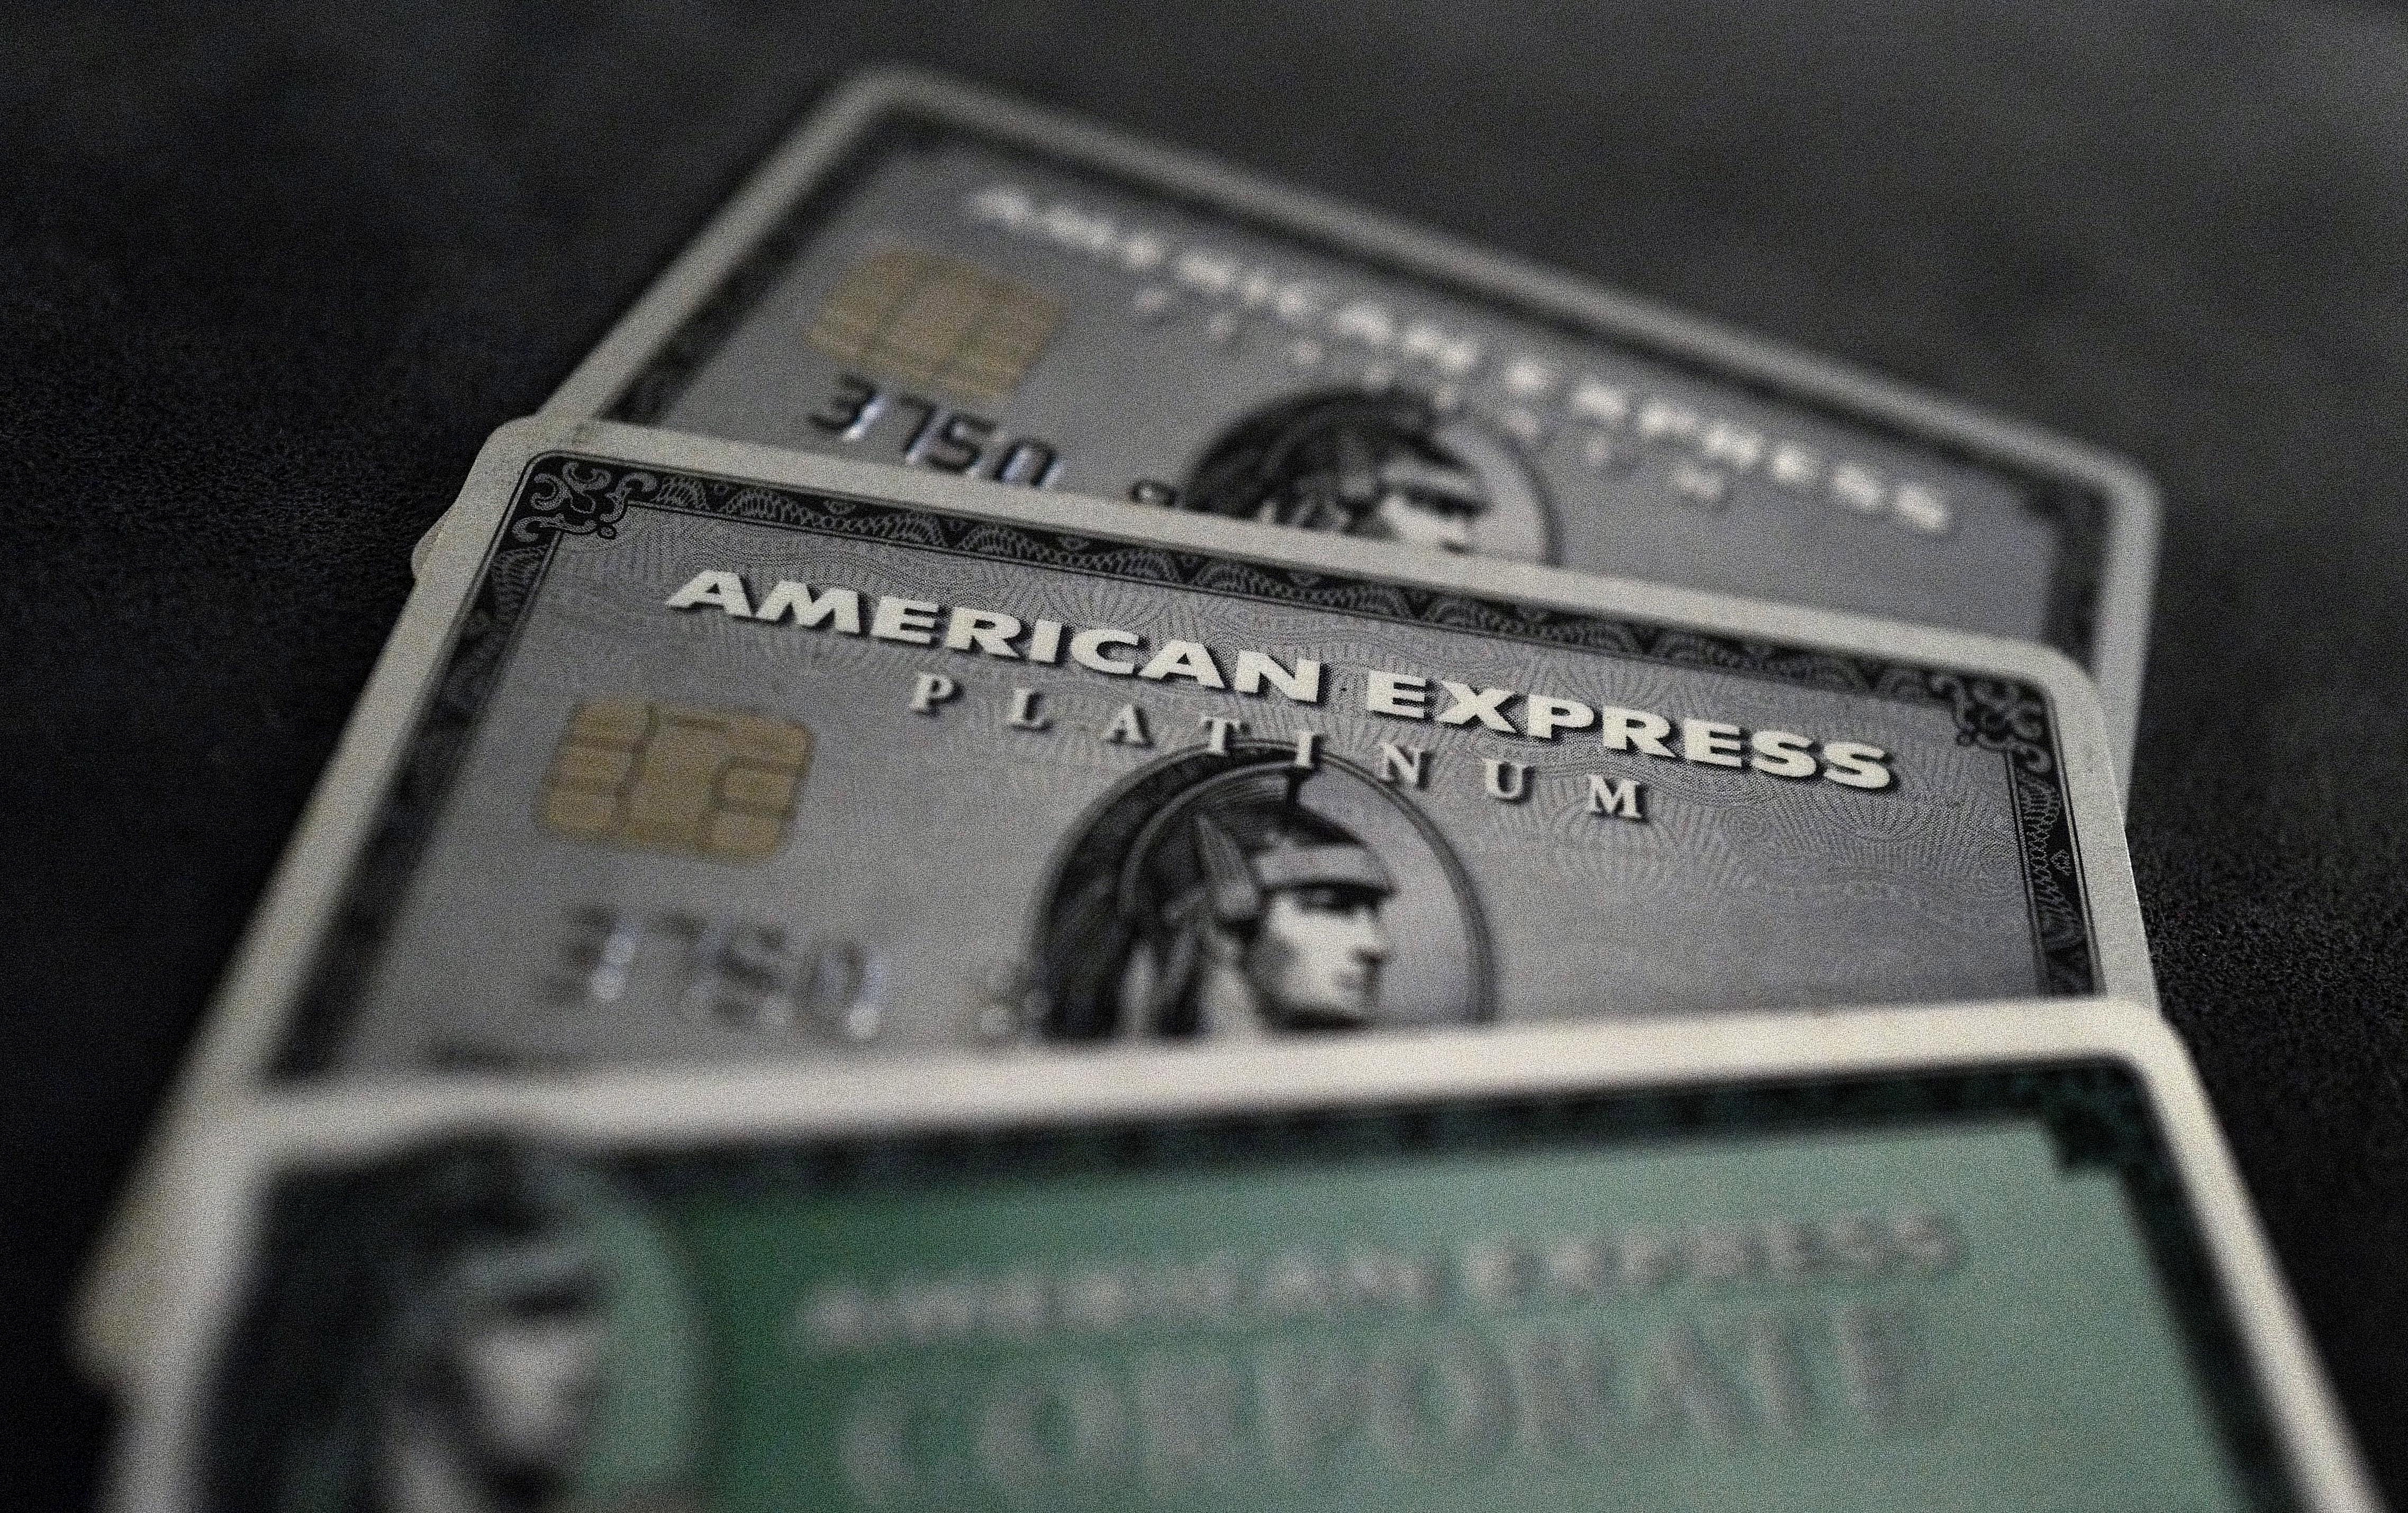 Real American Express